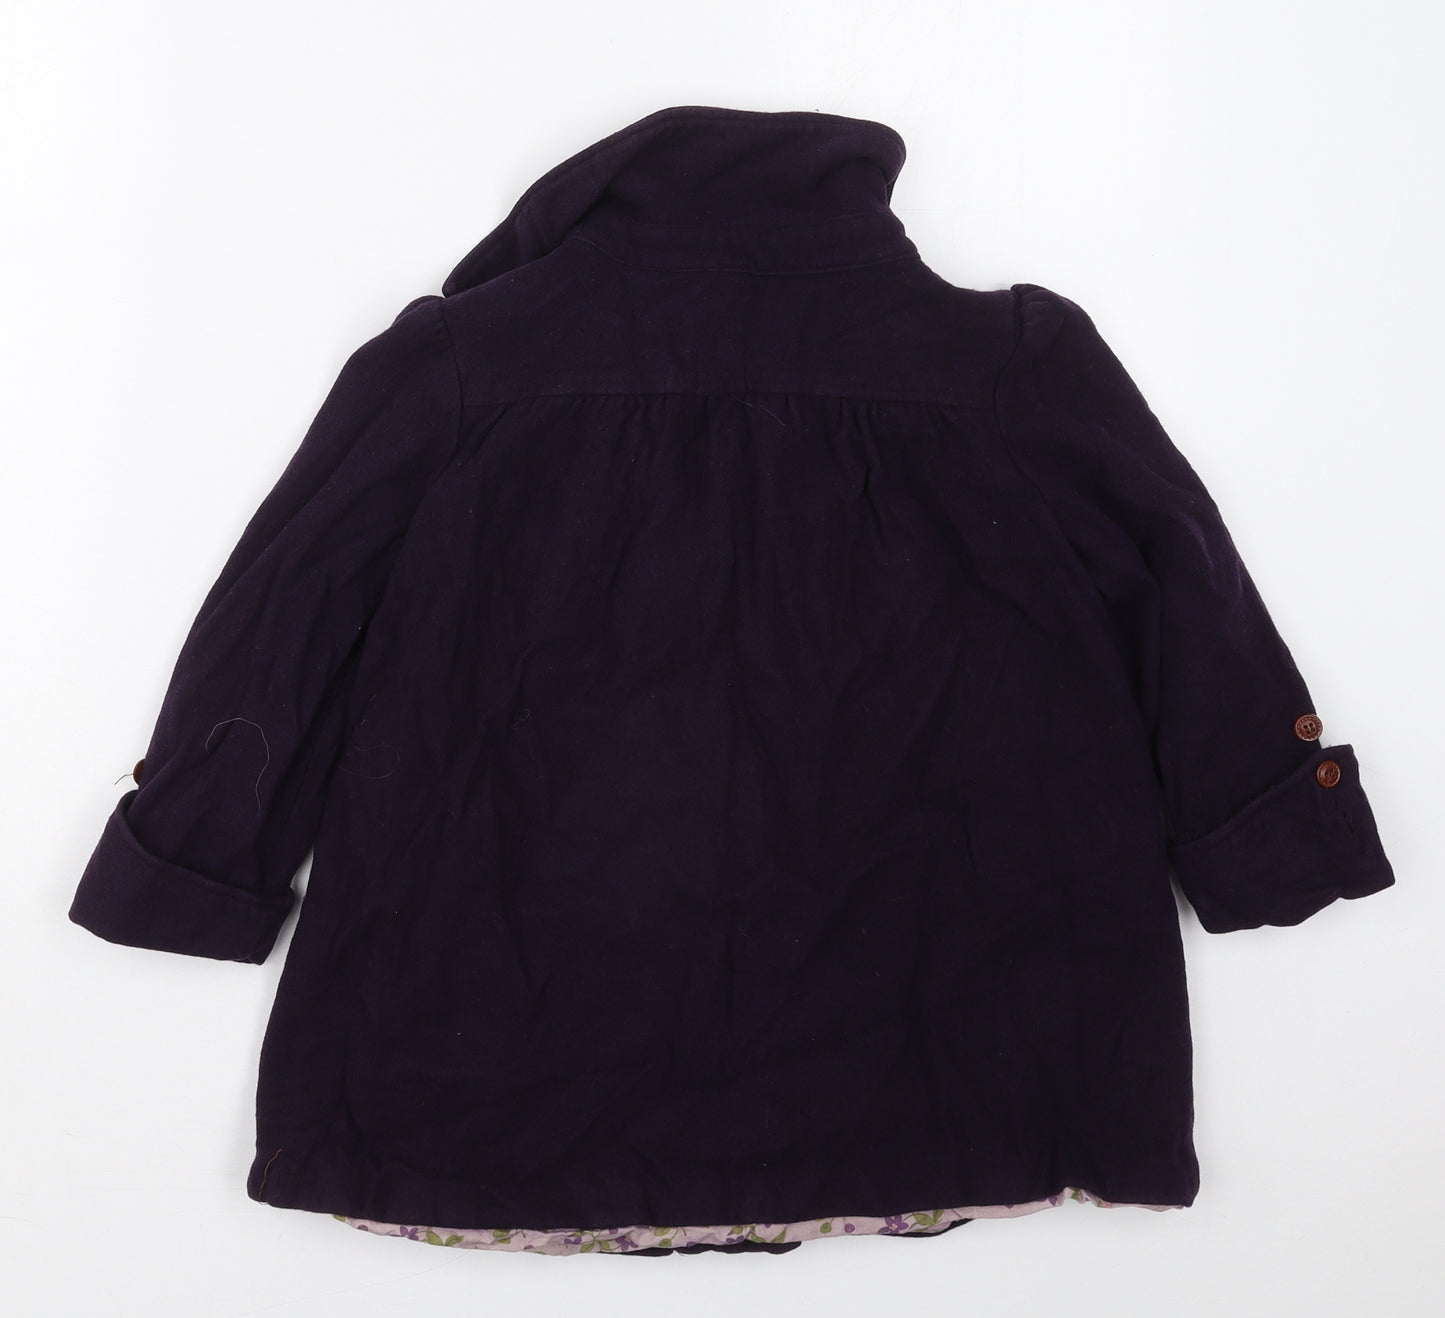 Molly & Jack Girls Purple   Pea Coat Coat Size 4-5 Years  Button